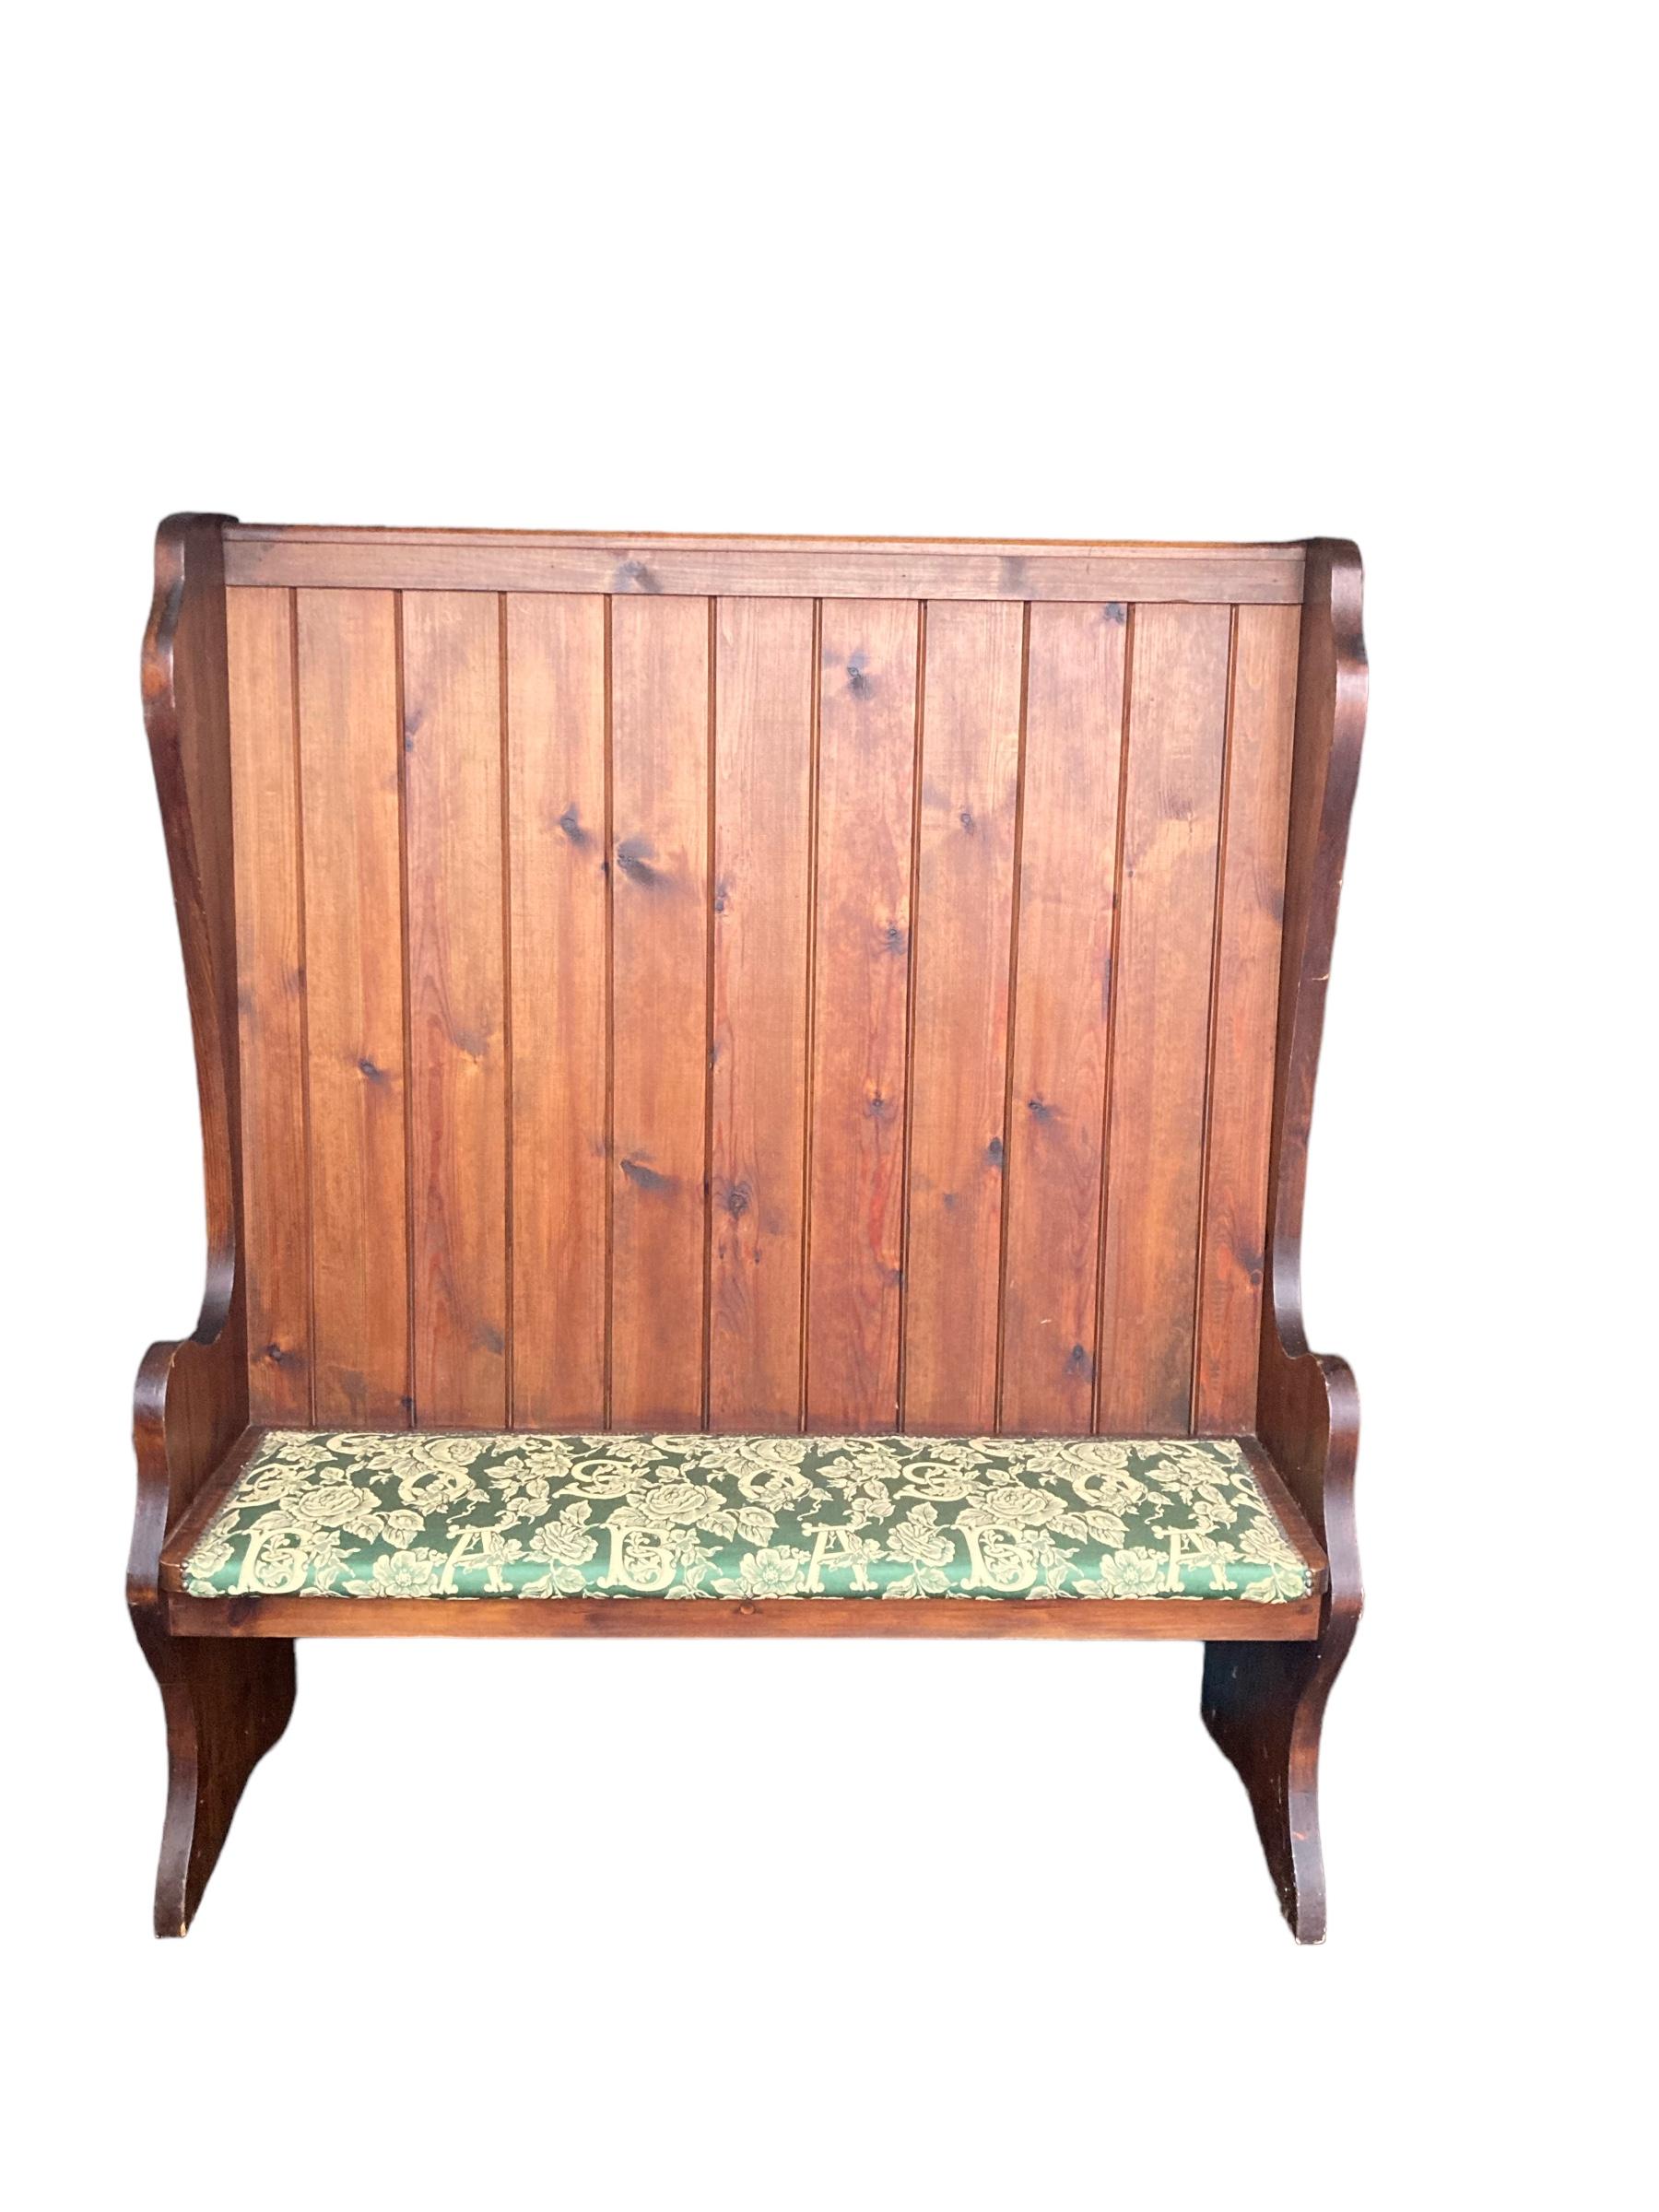 Large Antique High Back Pine Church Pew Bench CIRCA 1920'S In Good Condition For Sale In Bishop's Stortford, GB